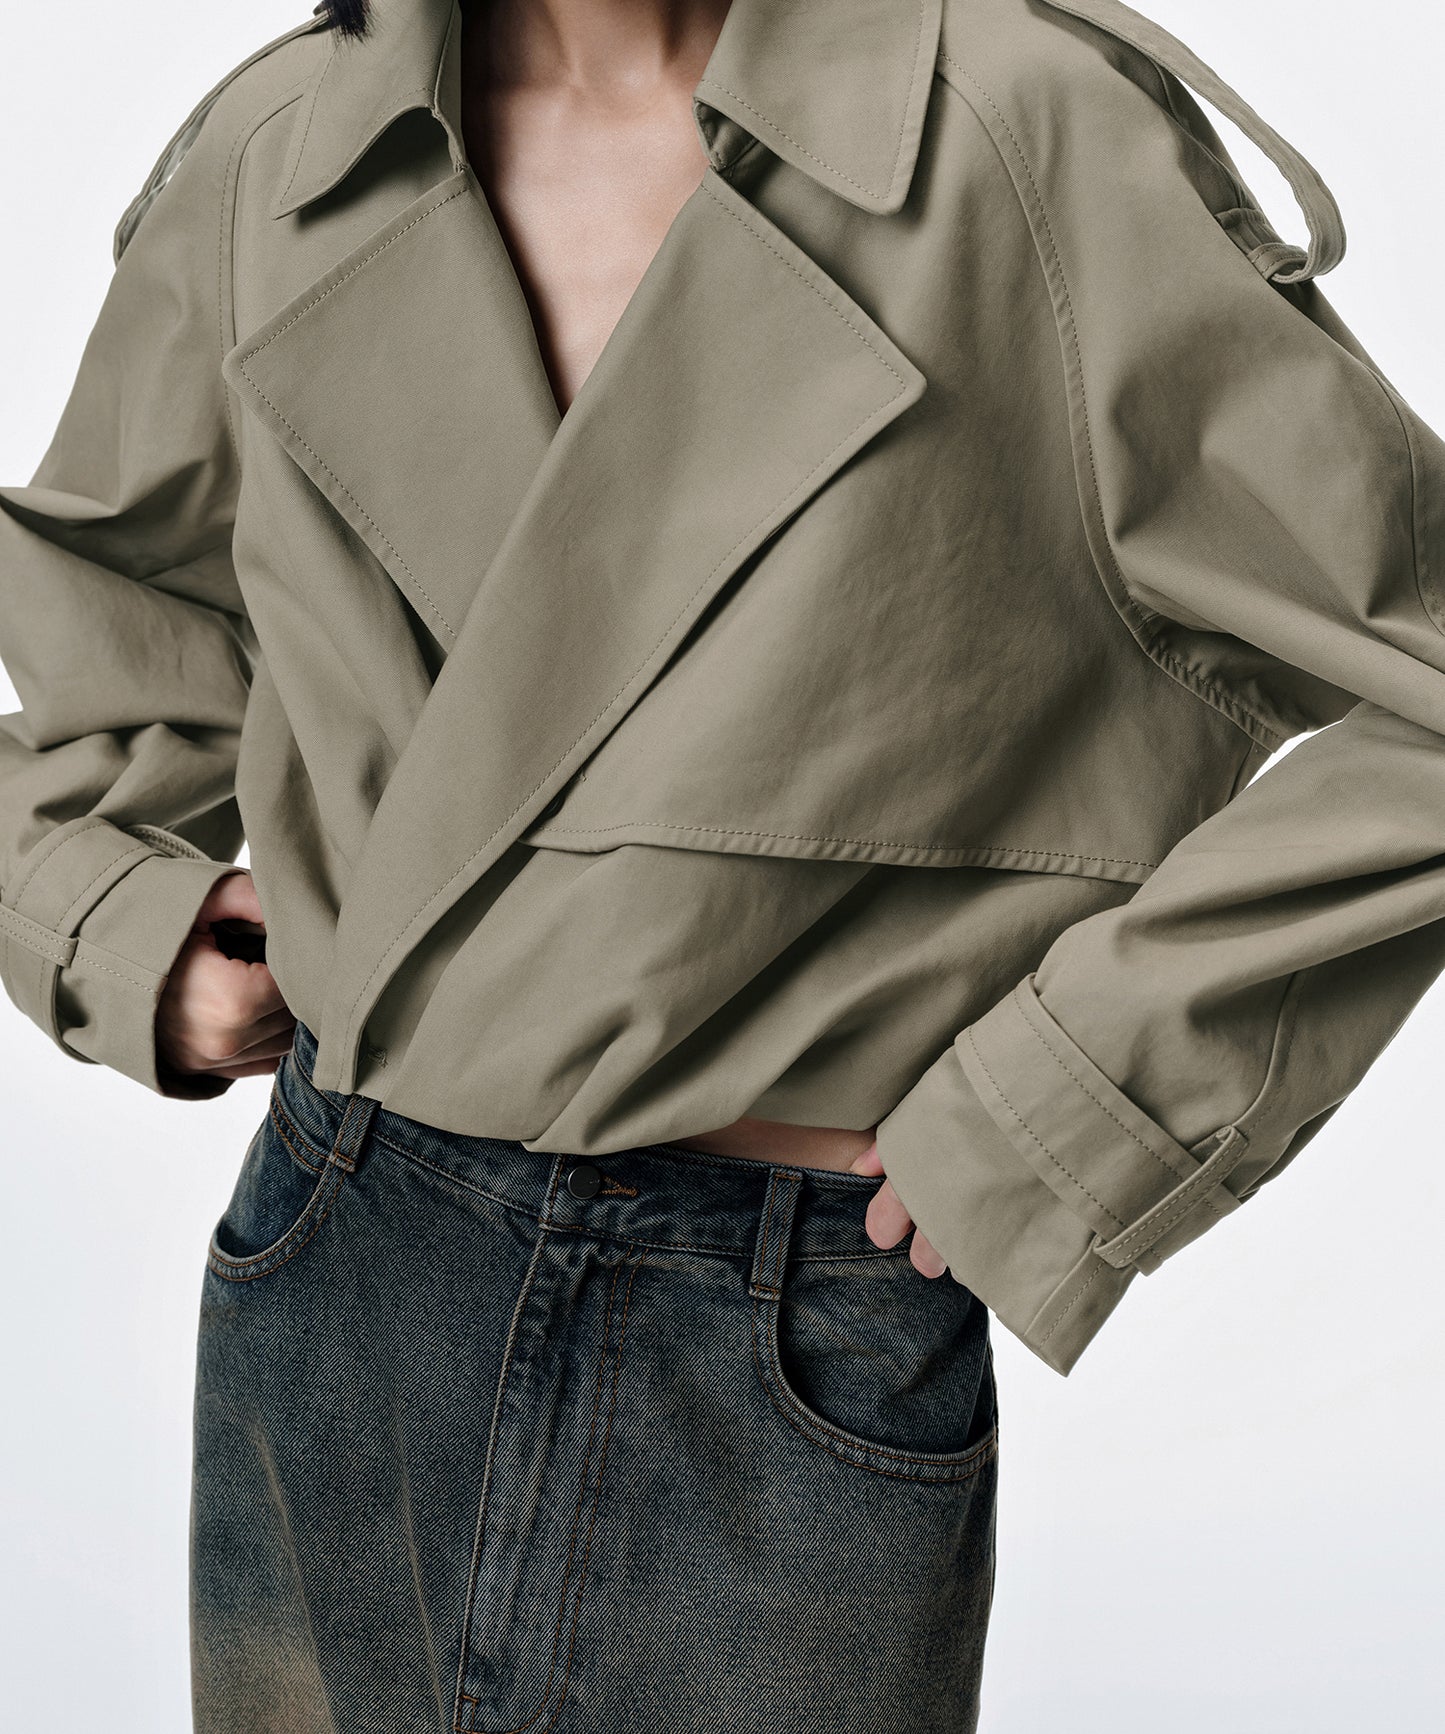 Pleated Cotton Trench Jacket